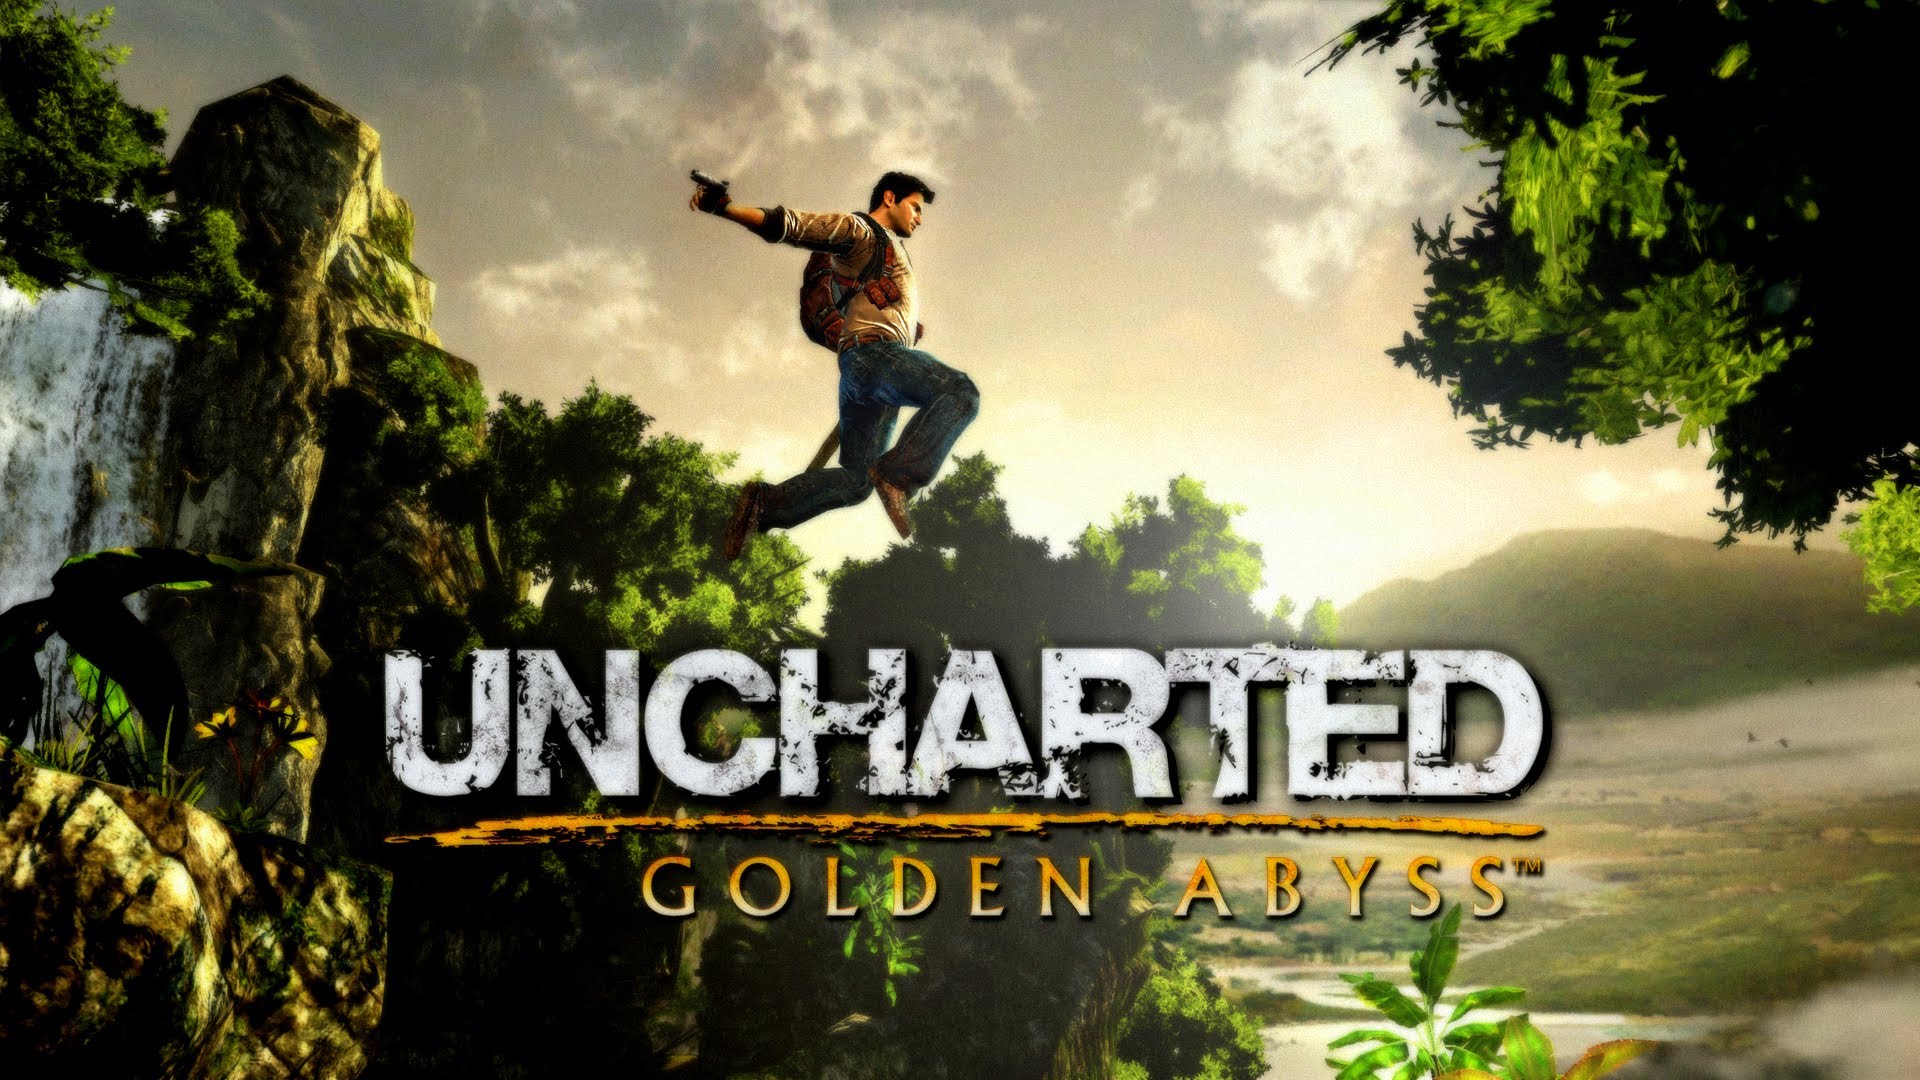 Will Uncharted Golden Abyss Make Its Way To The Ps4 Anything Is